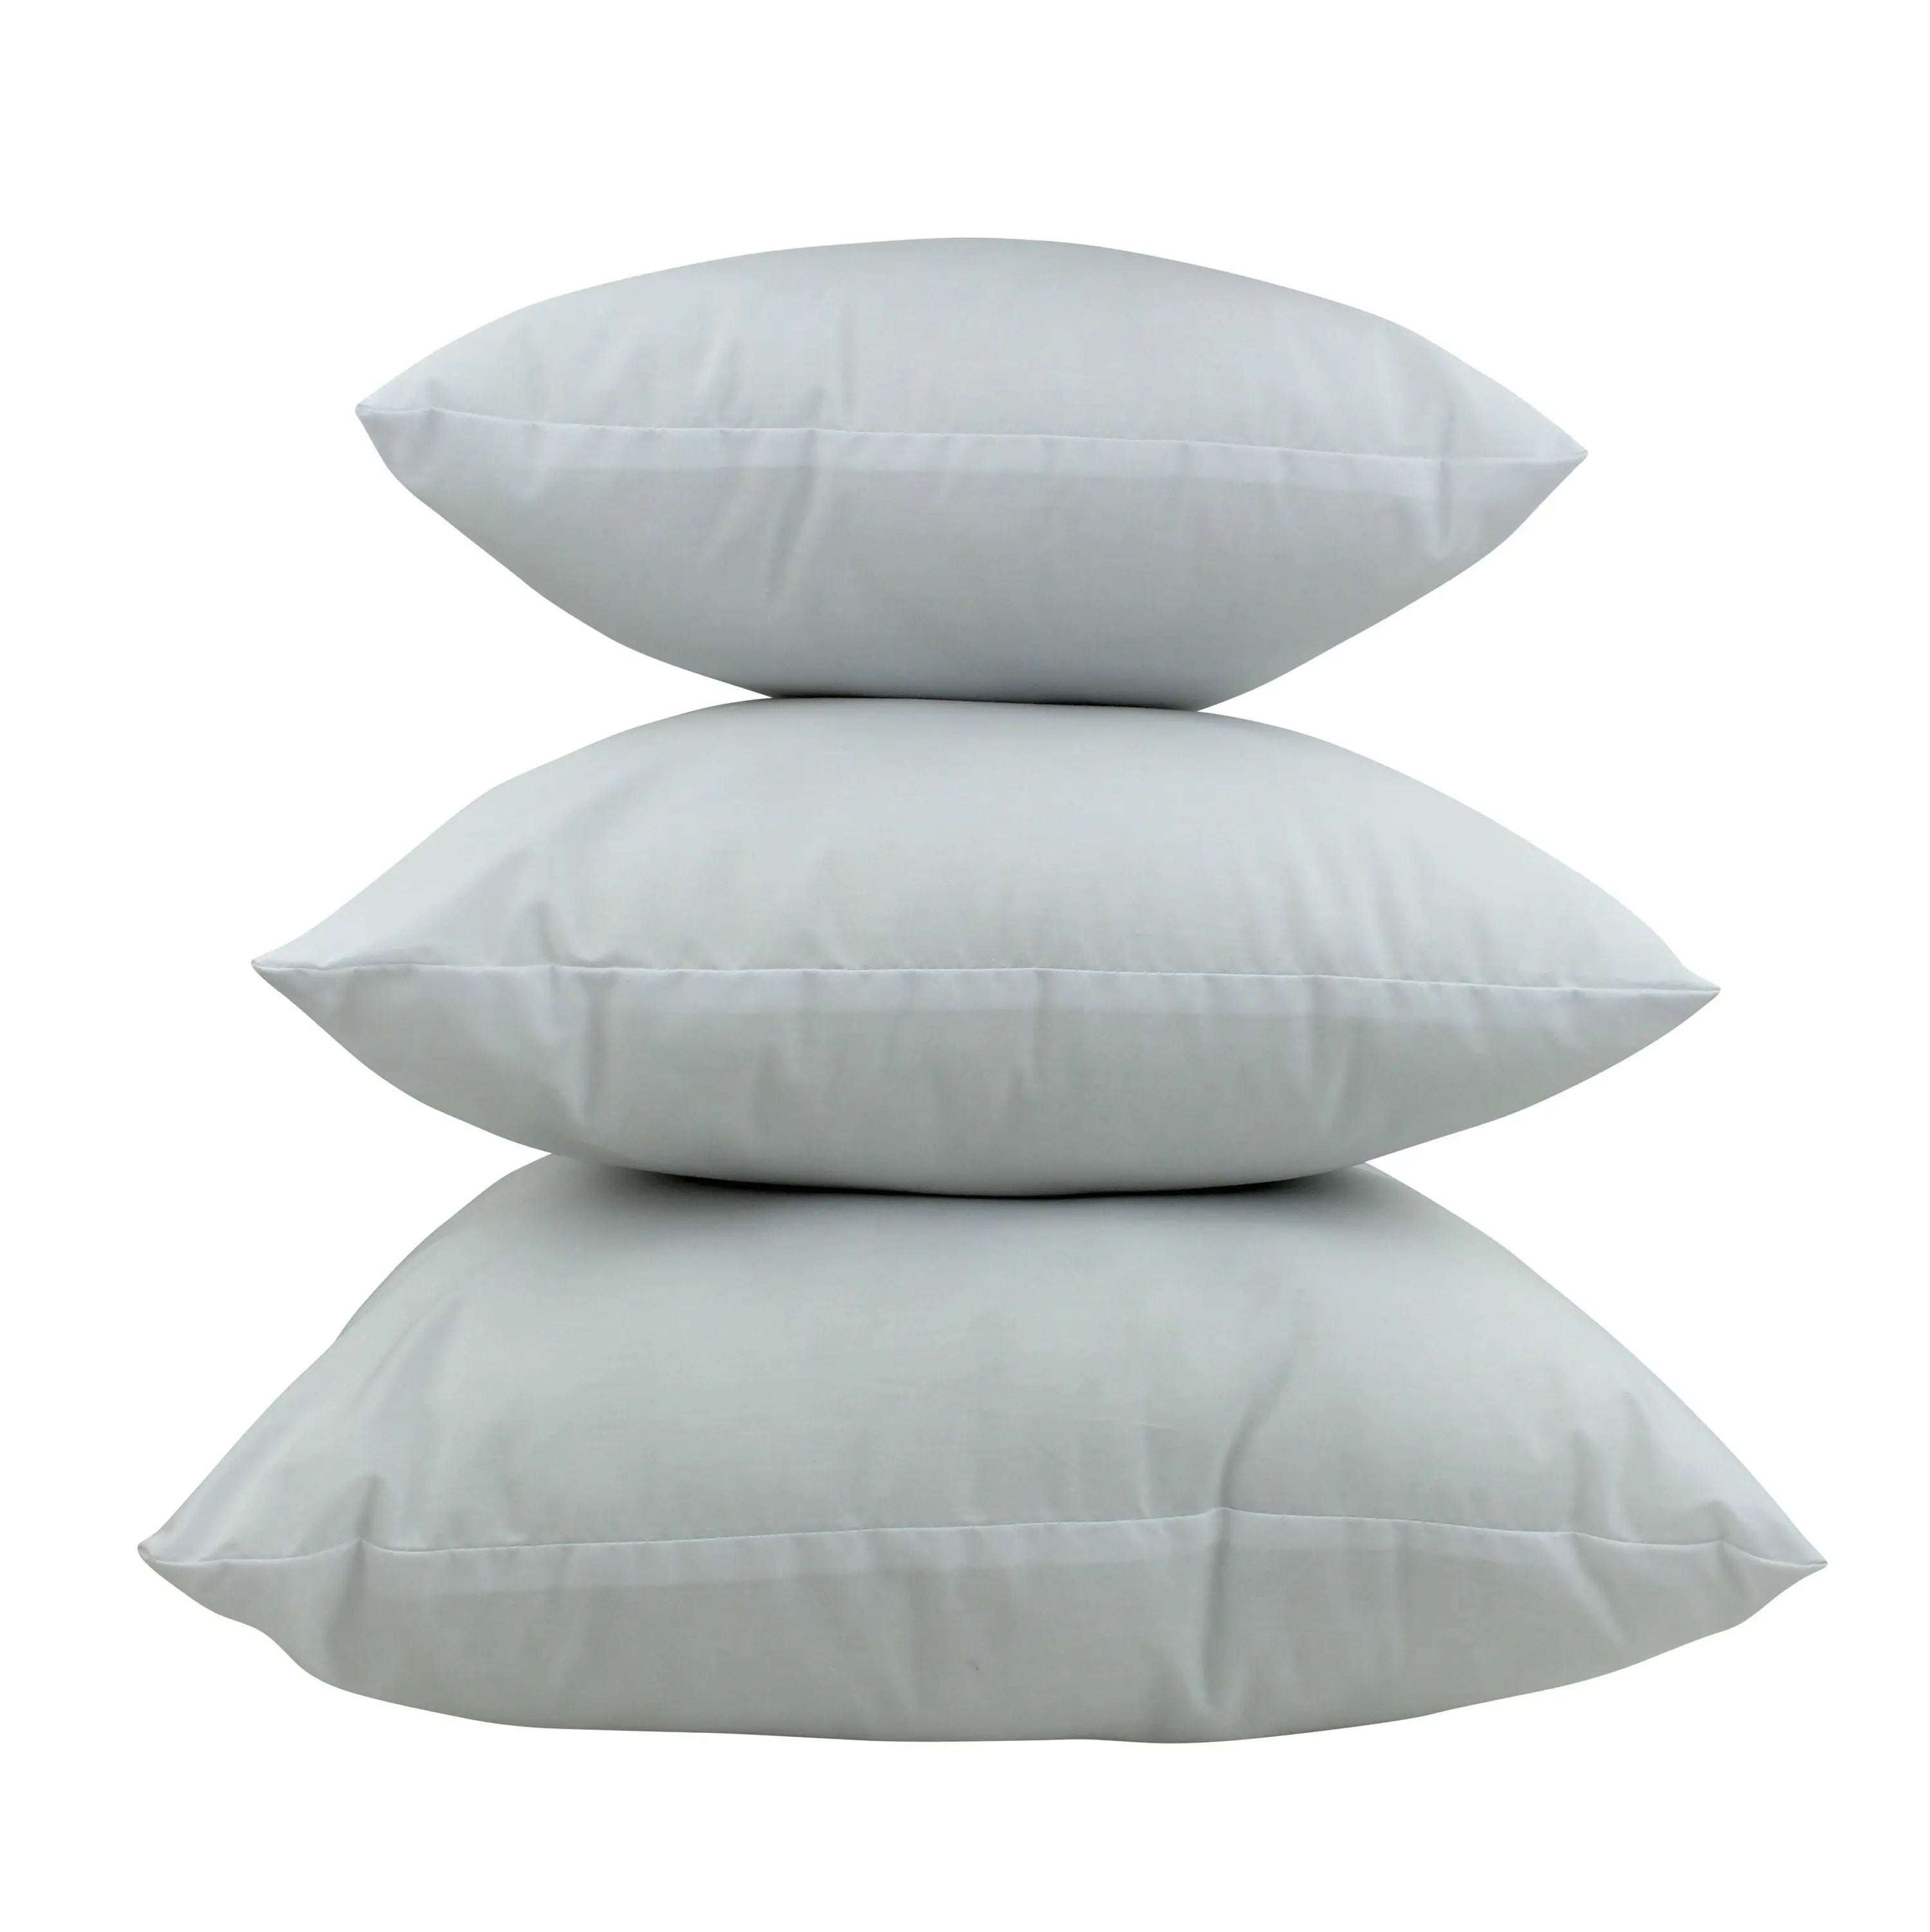 Cotton Cover Hypoallergenic Polyester Filled Pillow Insert | 12x12 | 14x14 | 16x16 | 18x18 | 20x20 - UniikPillows 20x20